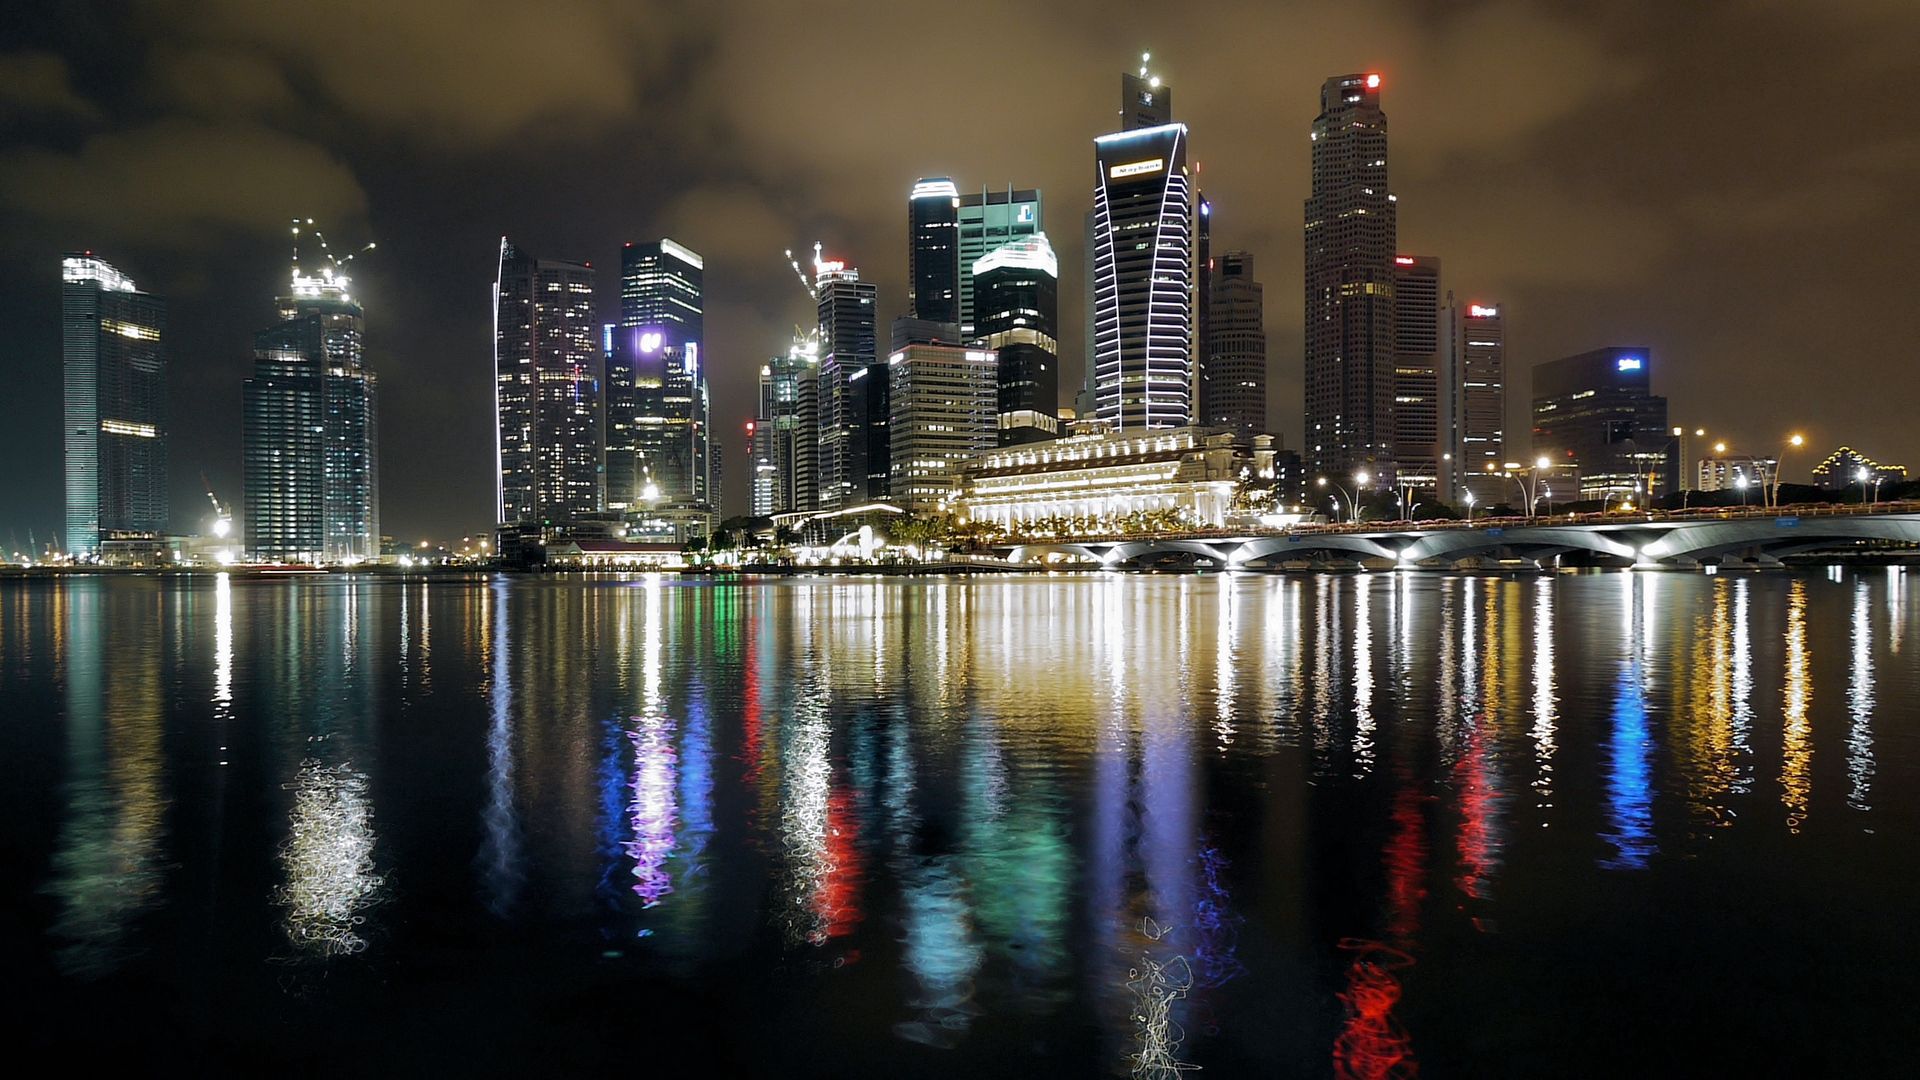 reflection, colorful, night, cities, building, colourful, singapore